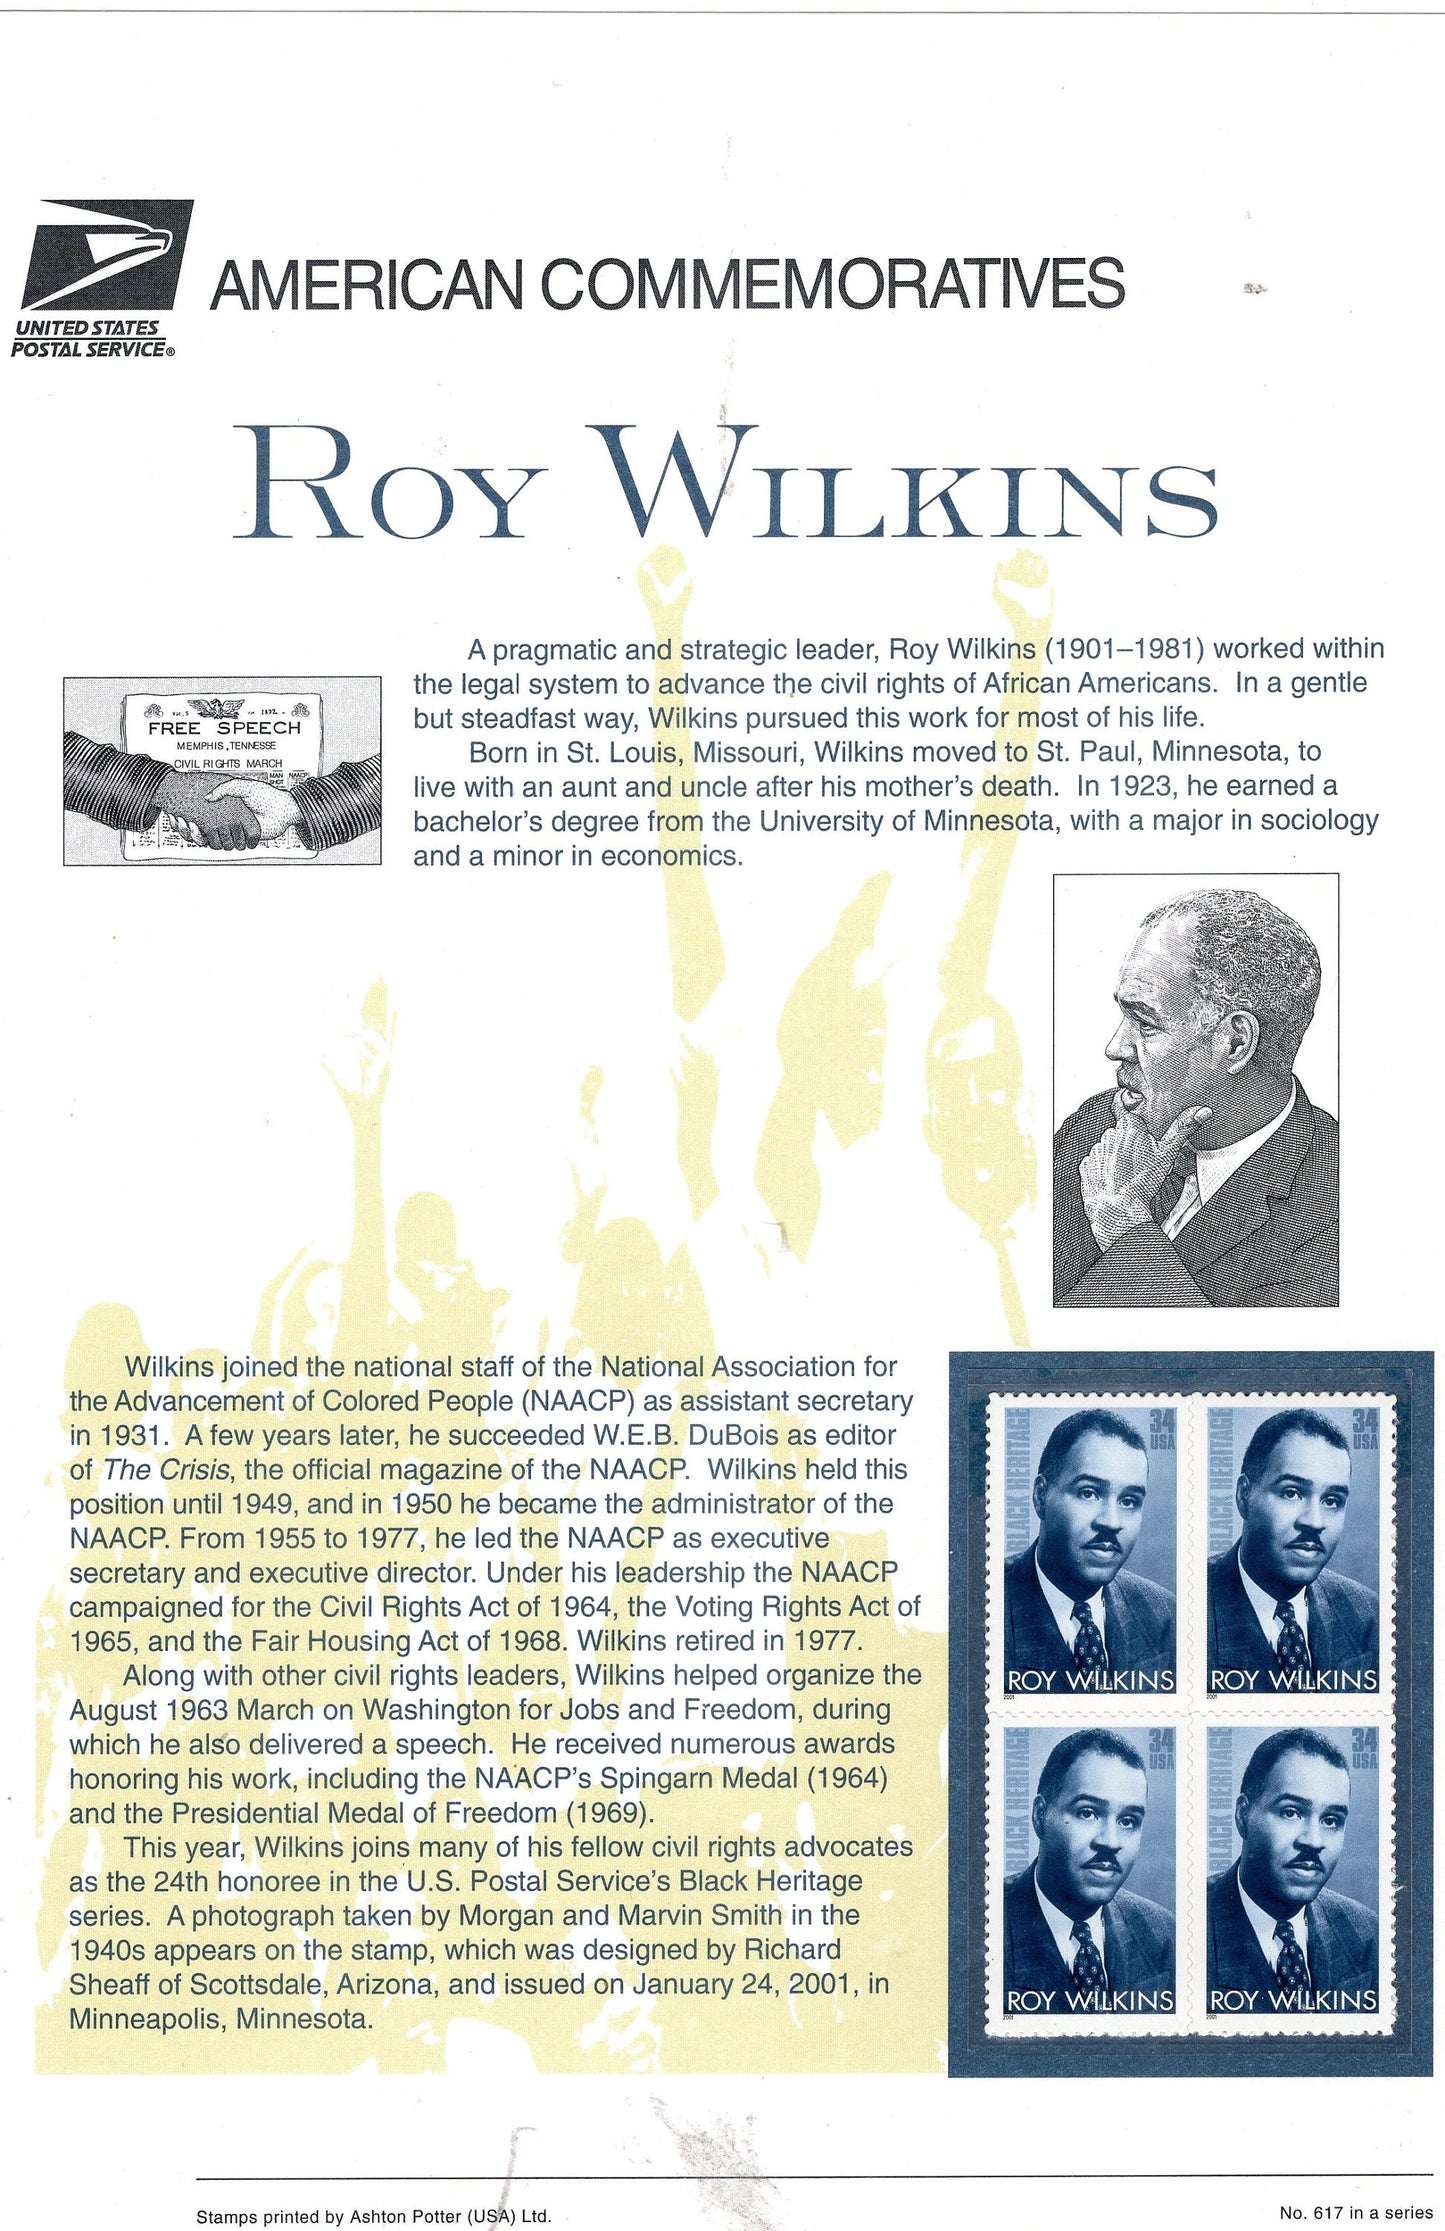 ROY WILKINS NAACP Black Americans Civil Rights Commemorative Panel with a Block of 4 Stamps Illustrations plus Text – A Great Gift 8.5x11 -